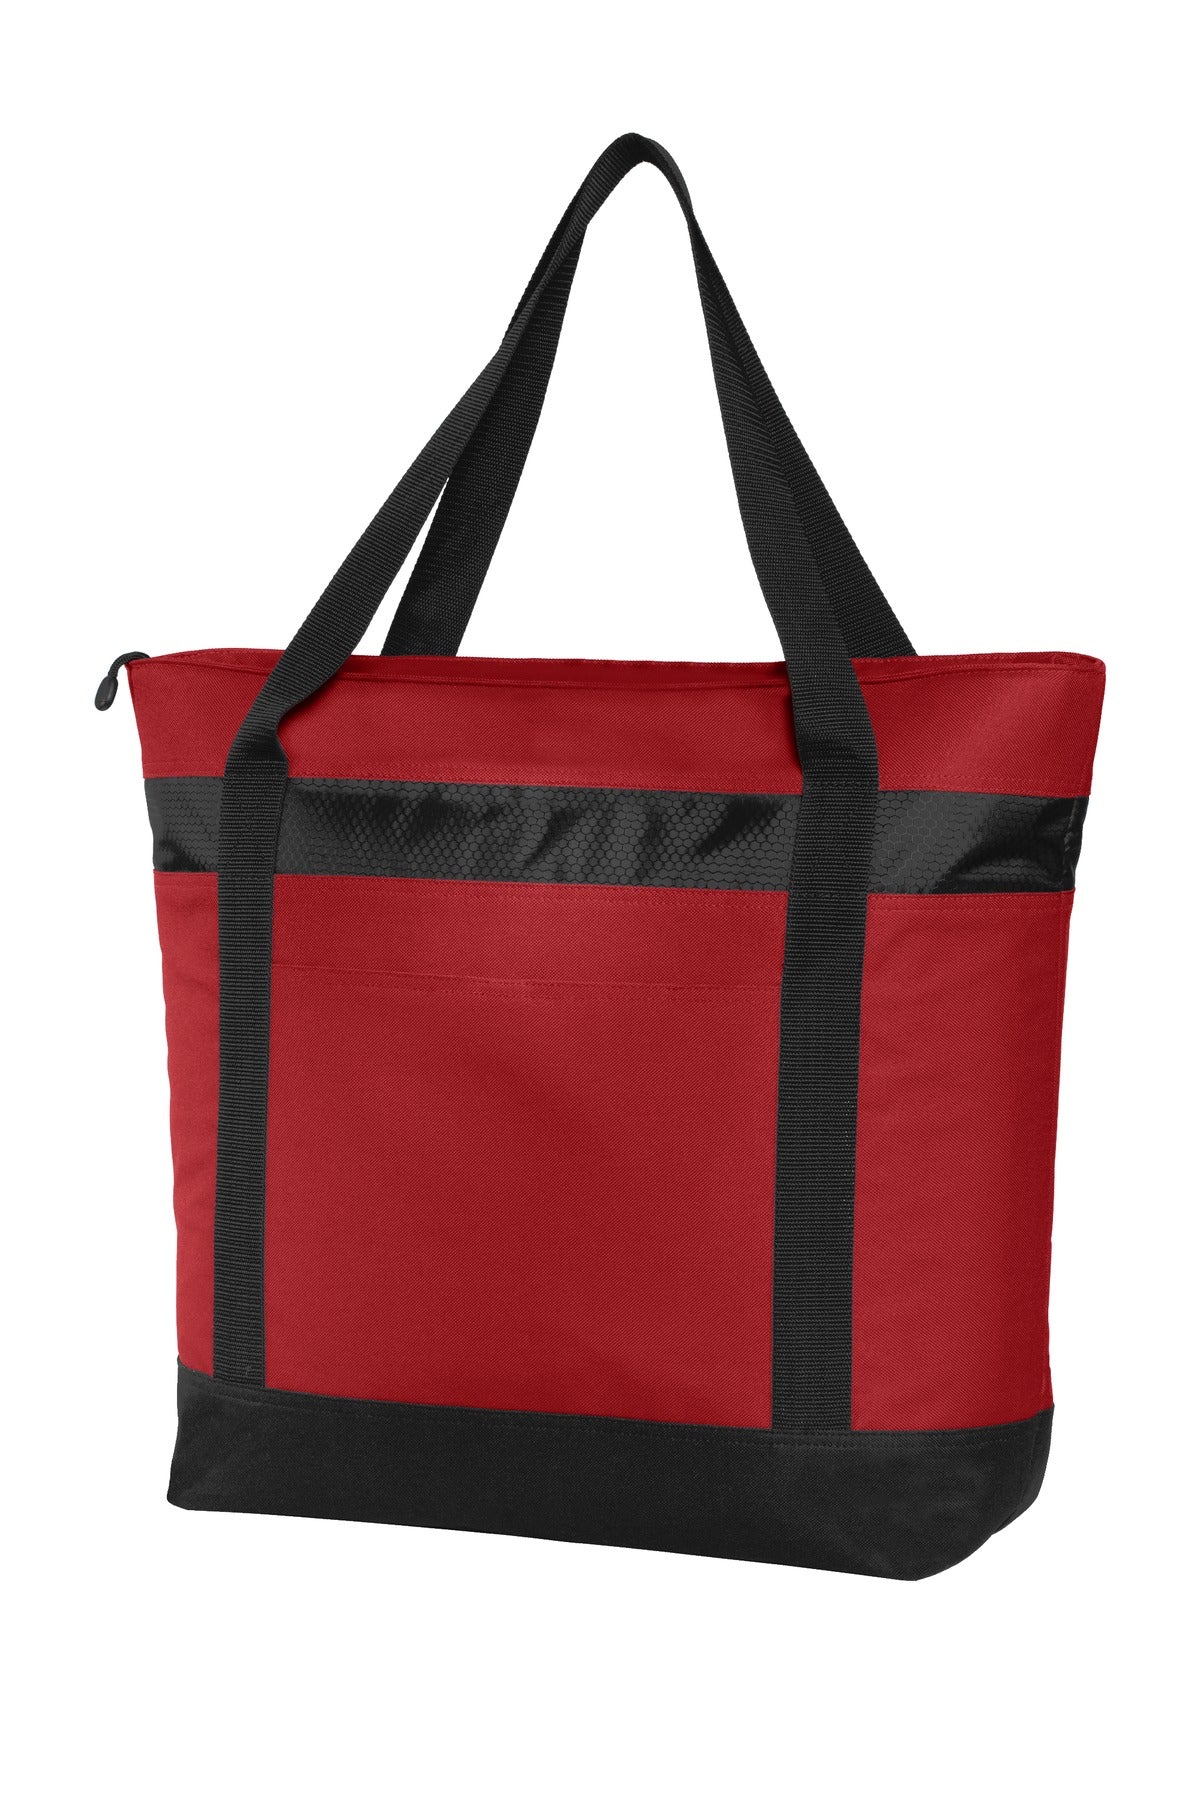 Bags Chili Red/ Black OSFA Port Authority